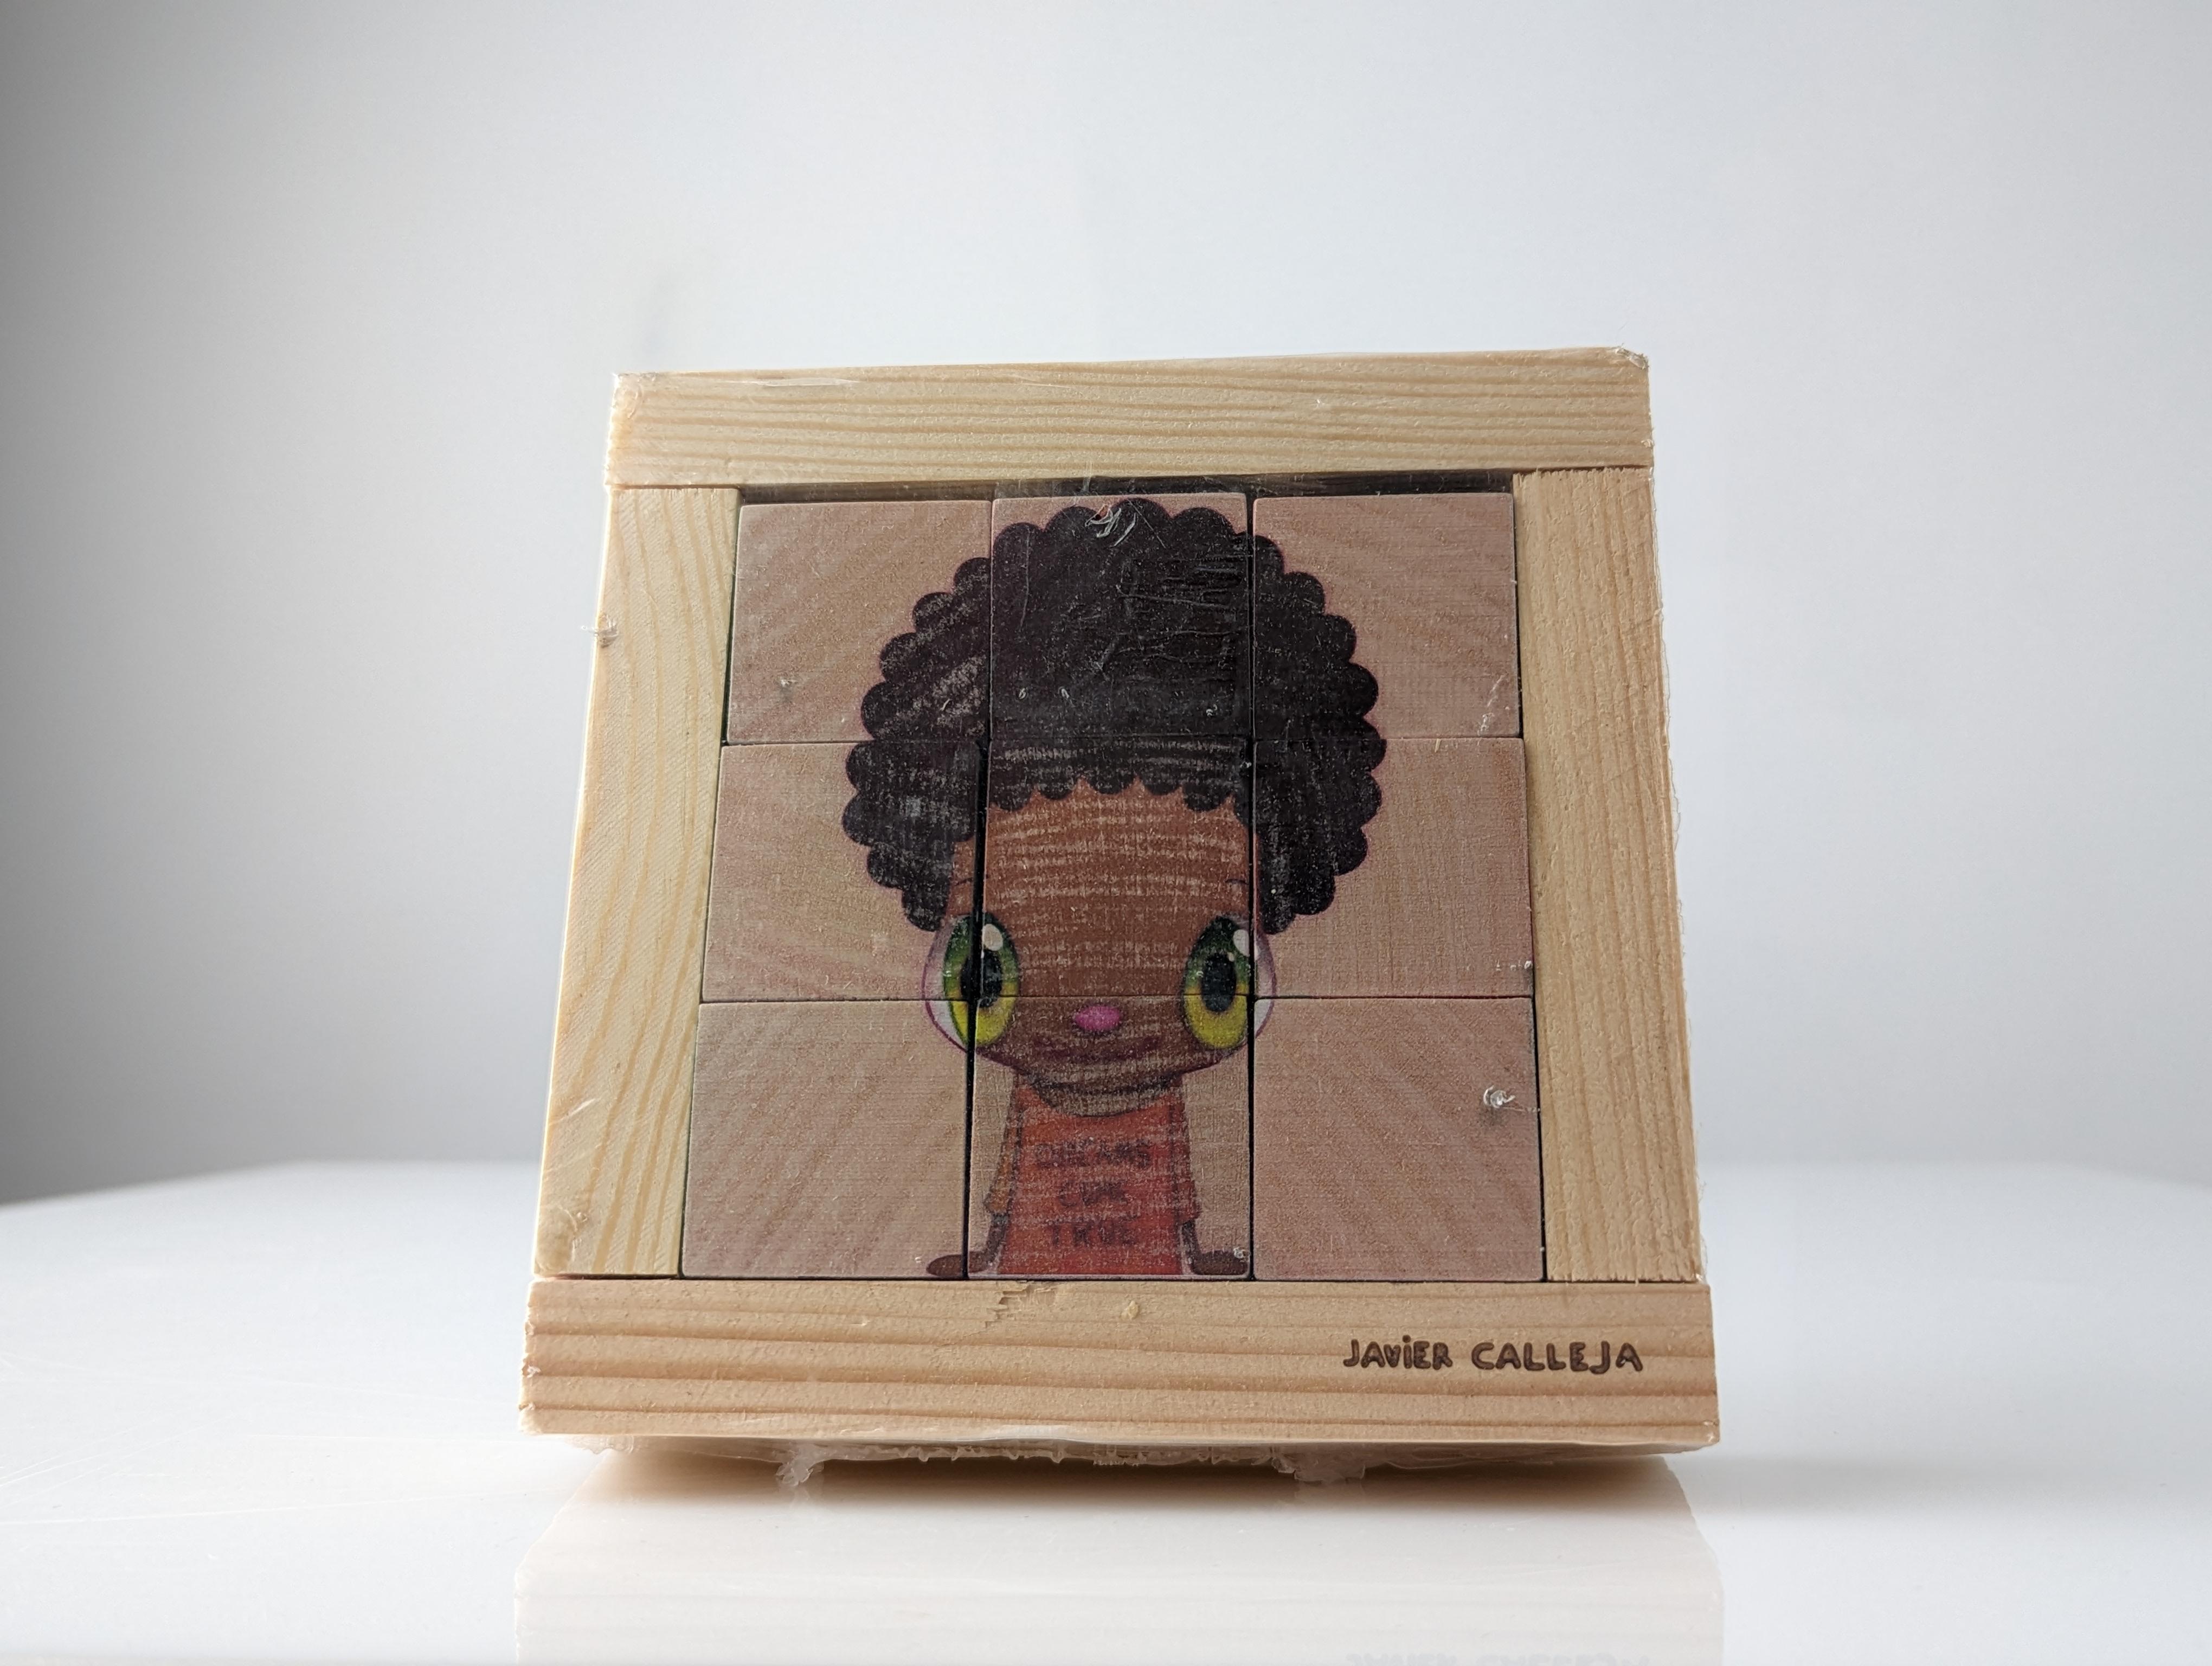 Discover the fascinating fusion between contemporary art and fun with this exclusive Javier Calleja Wooden Puzzle! It consists of 9 meticulously designed pieces to create 6 unique works by the renowned Spanish artist. This interactive work has been